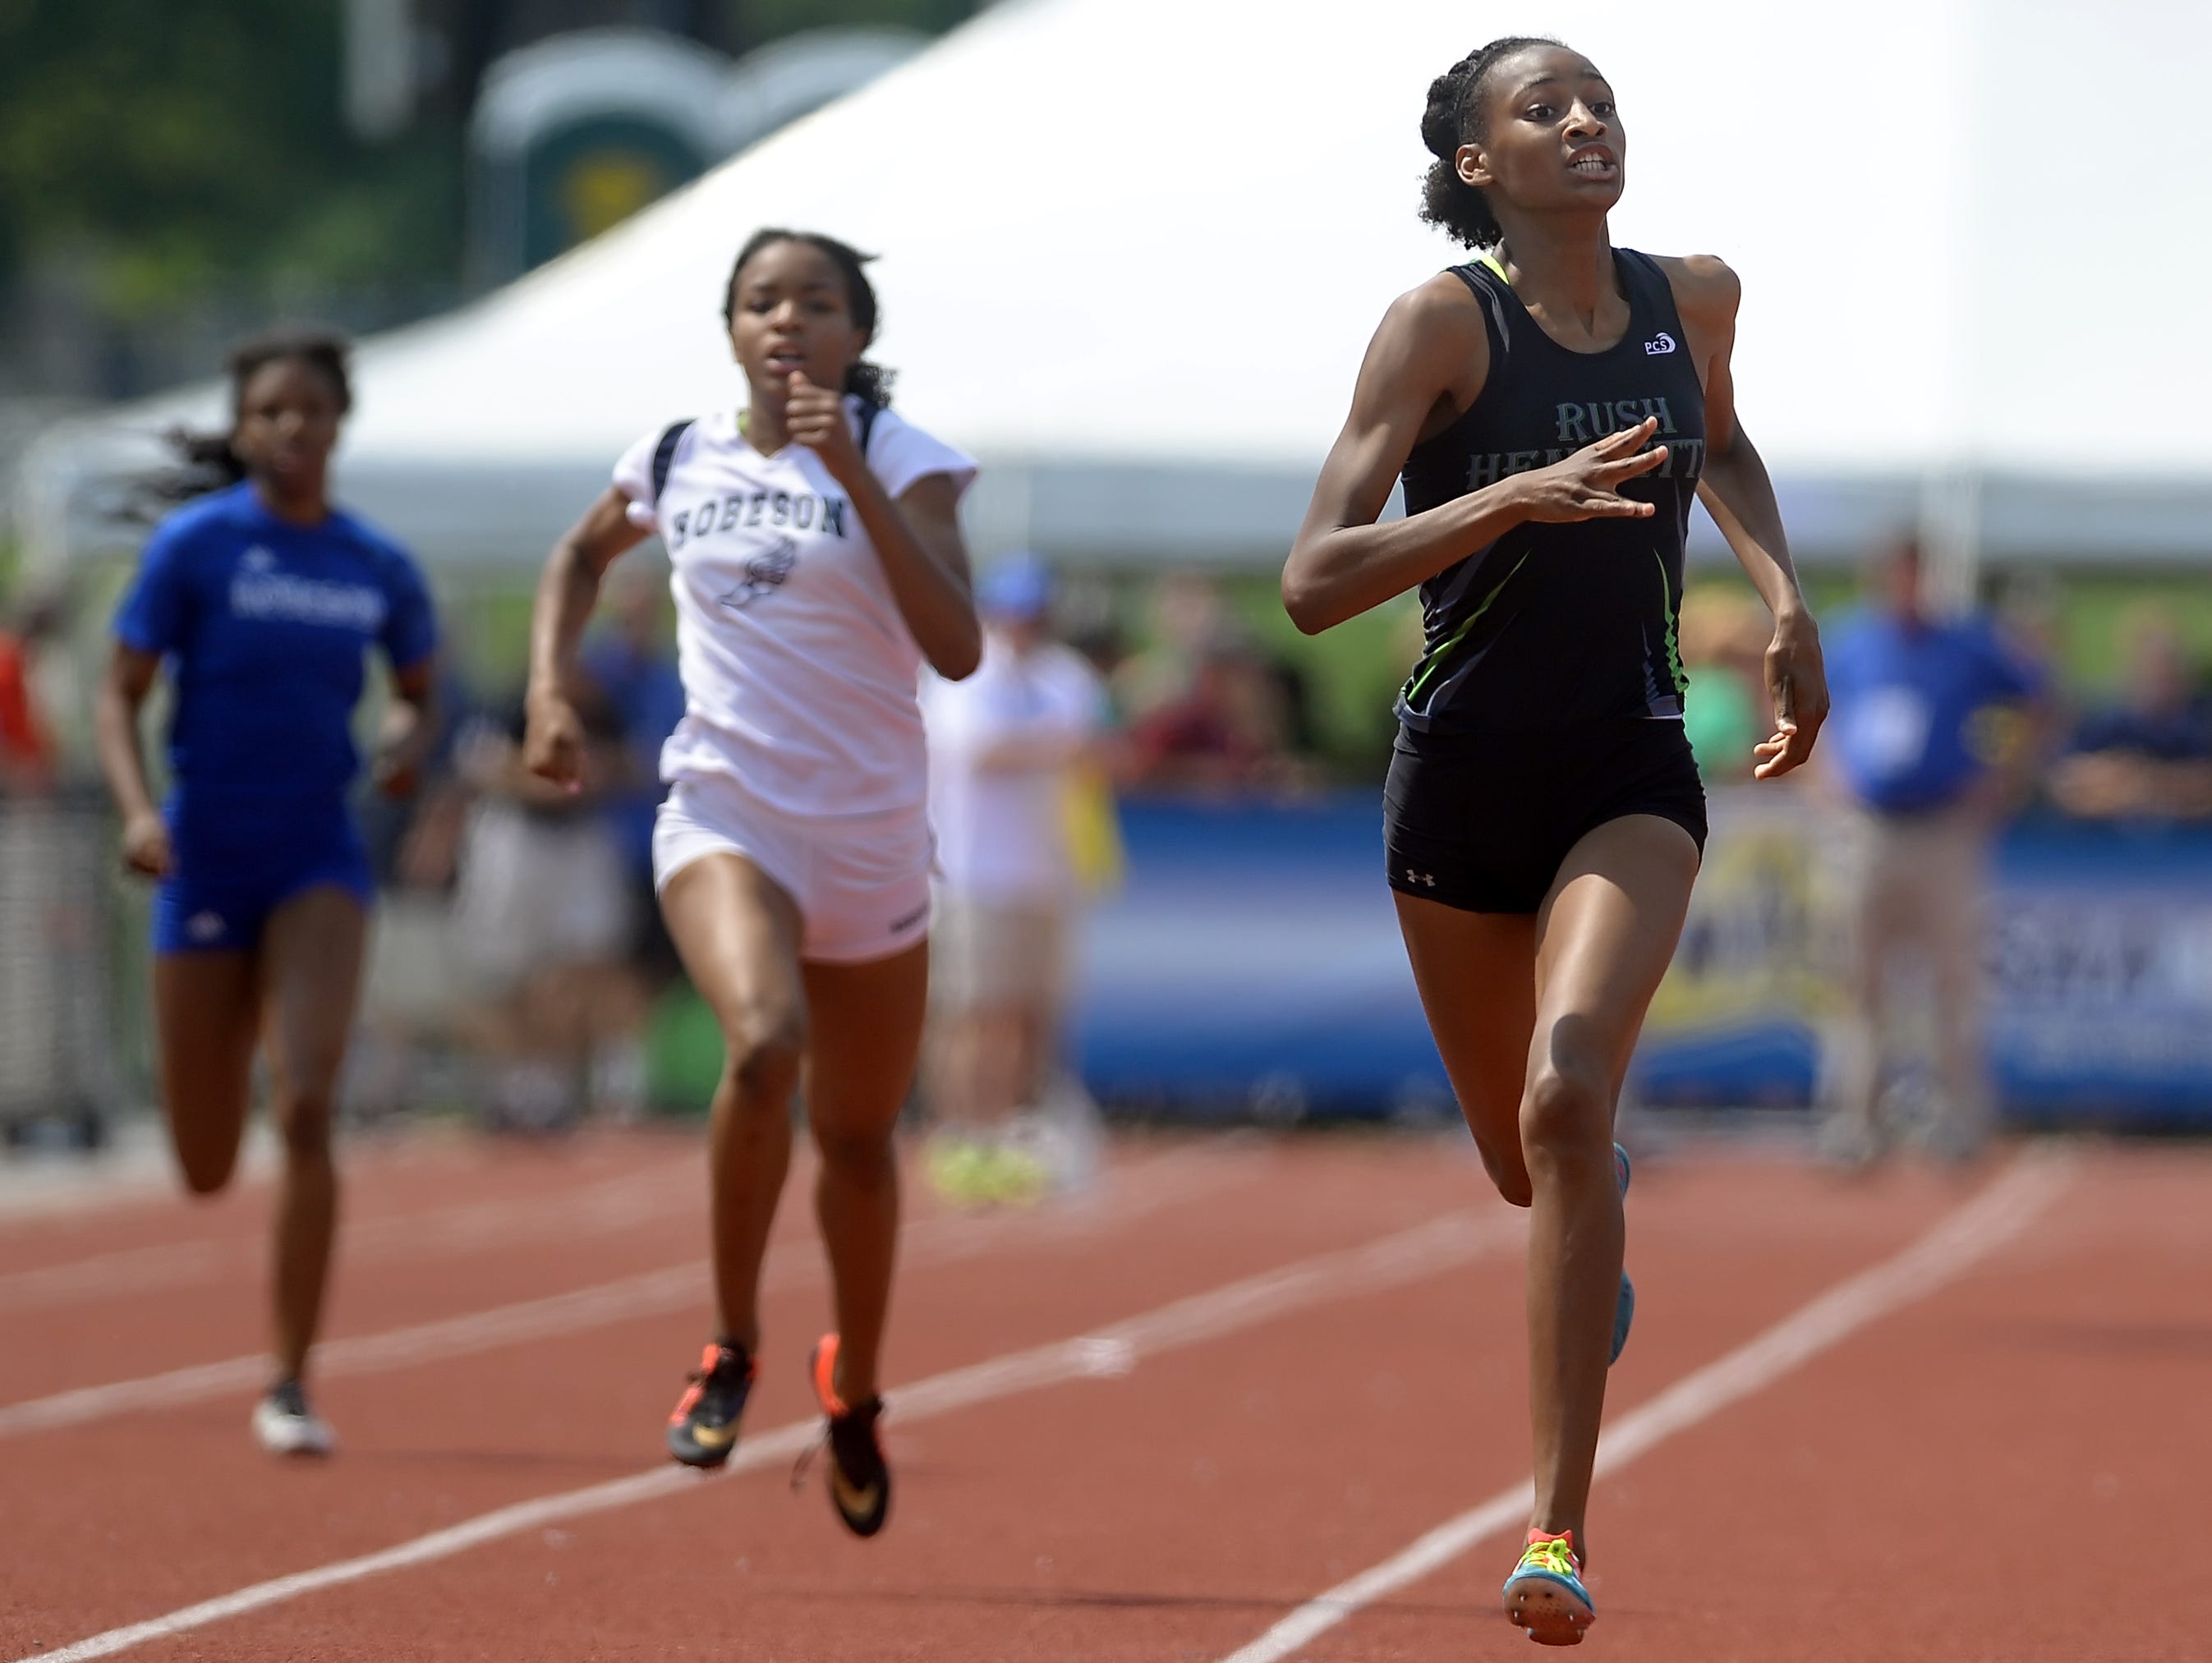 Rush-Henrietta's Sammy Watson, right at the 2015 high school outdoor state meet, won two events in here age division at the USA Track & Field National Junior Olympic Track & Field Championships.